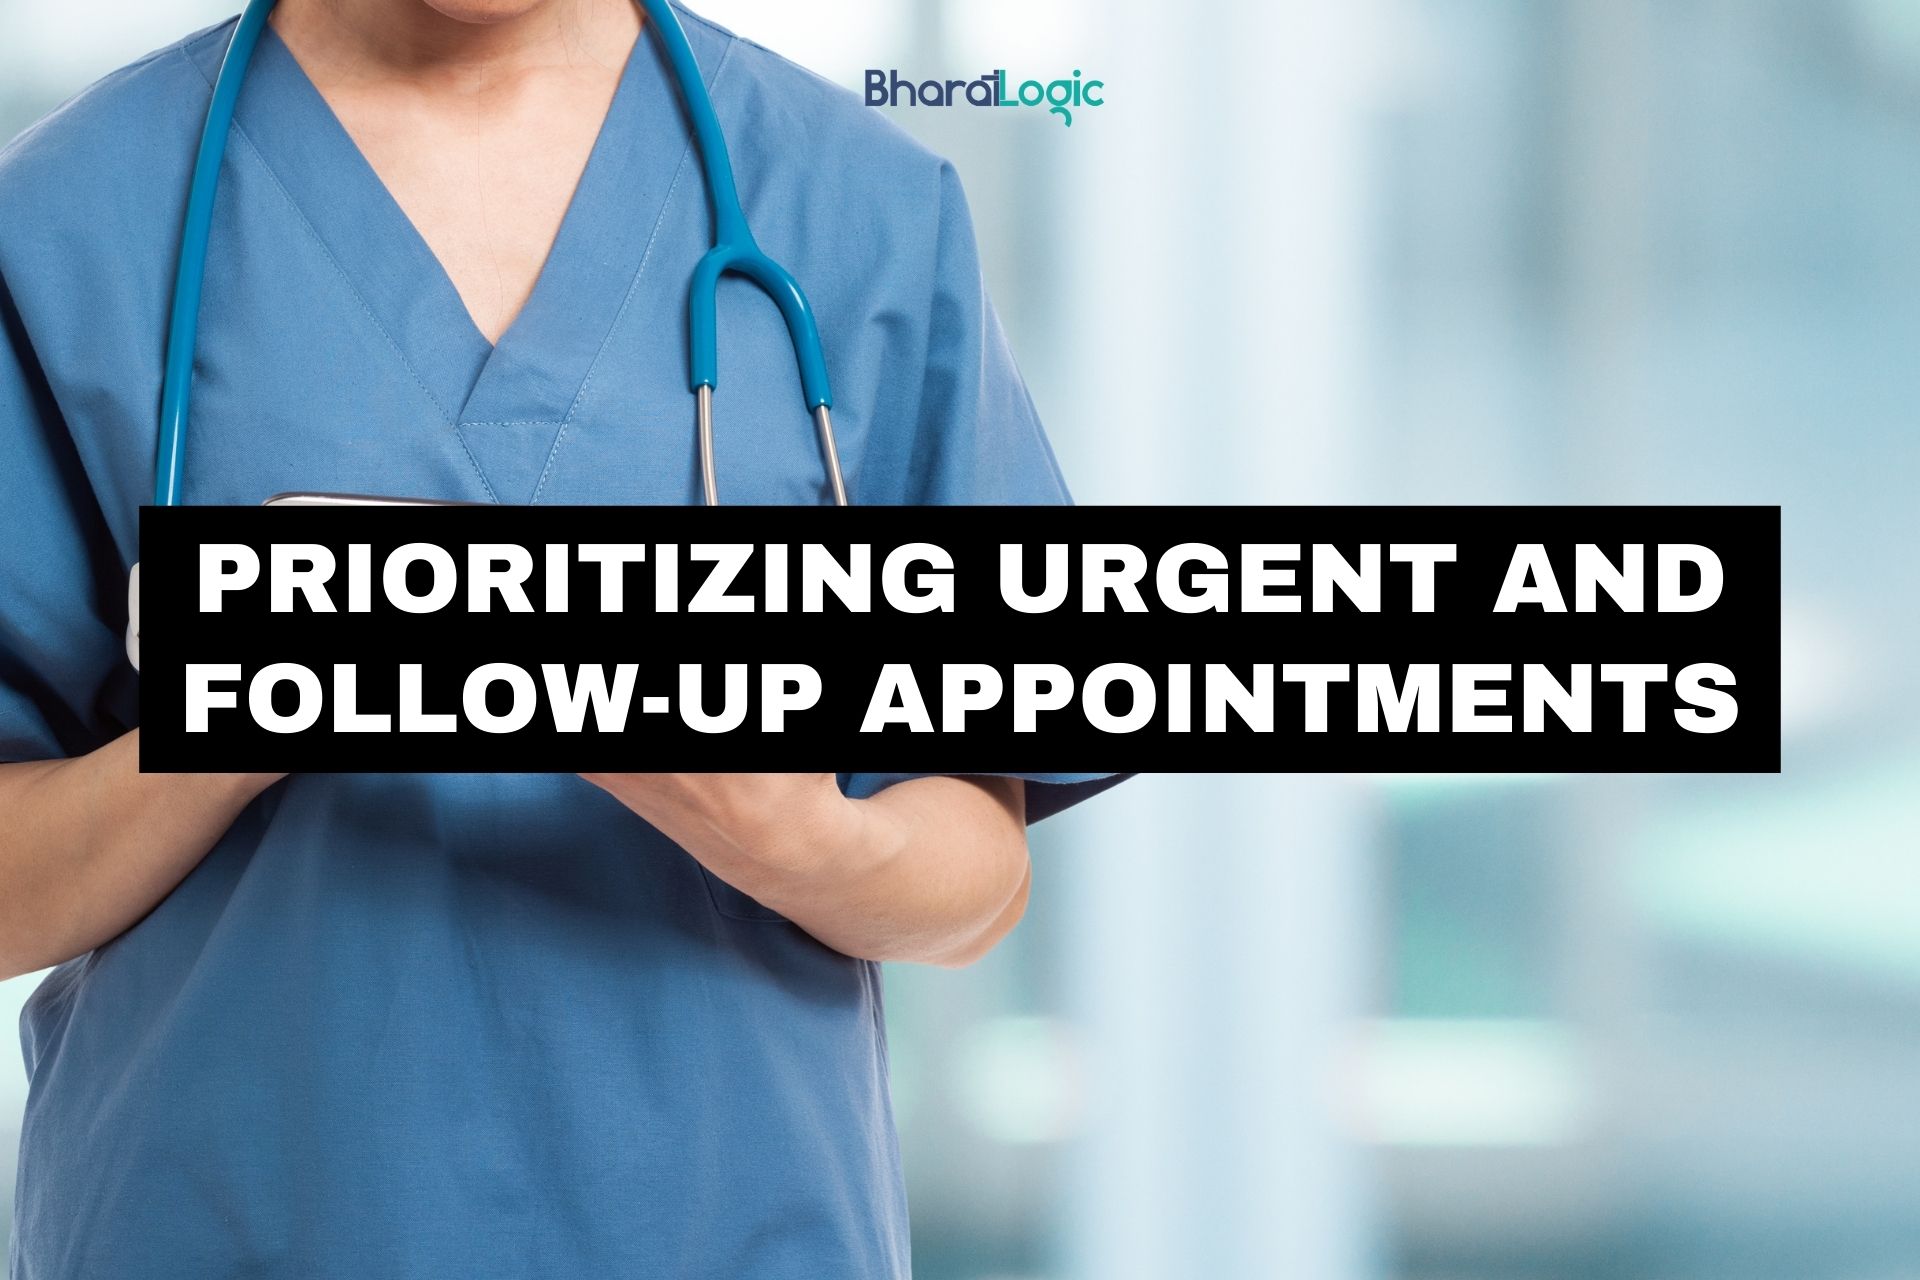 Prioritizing Urgent and Follow-Up Appointments